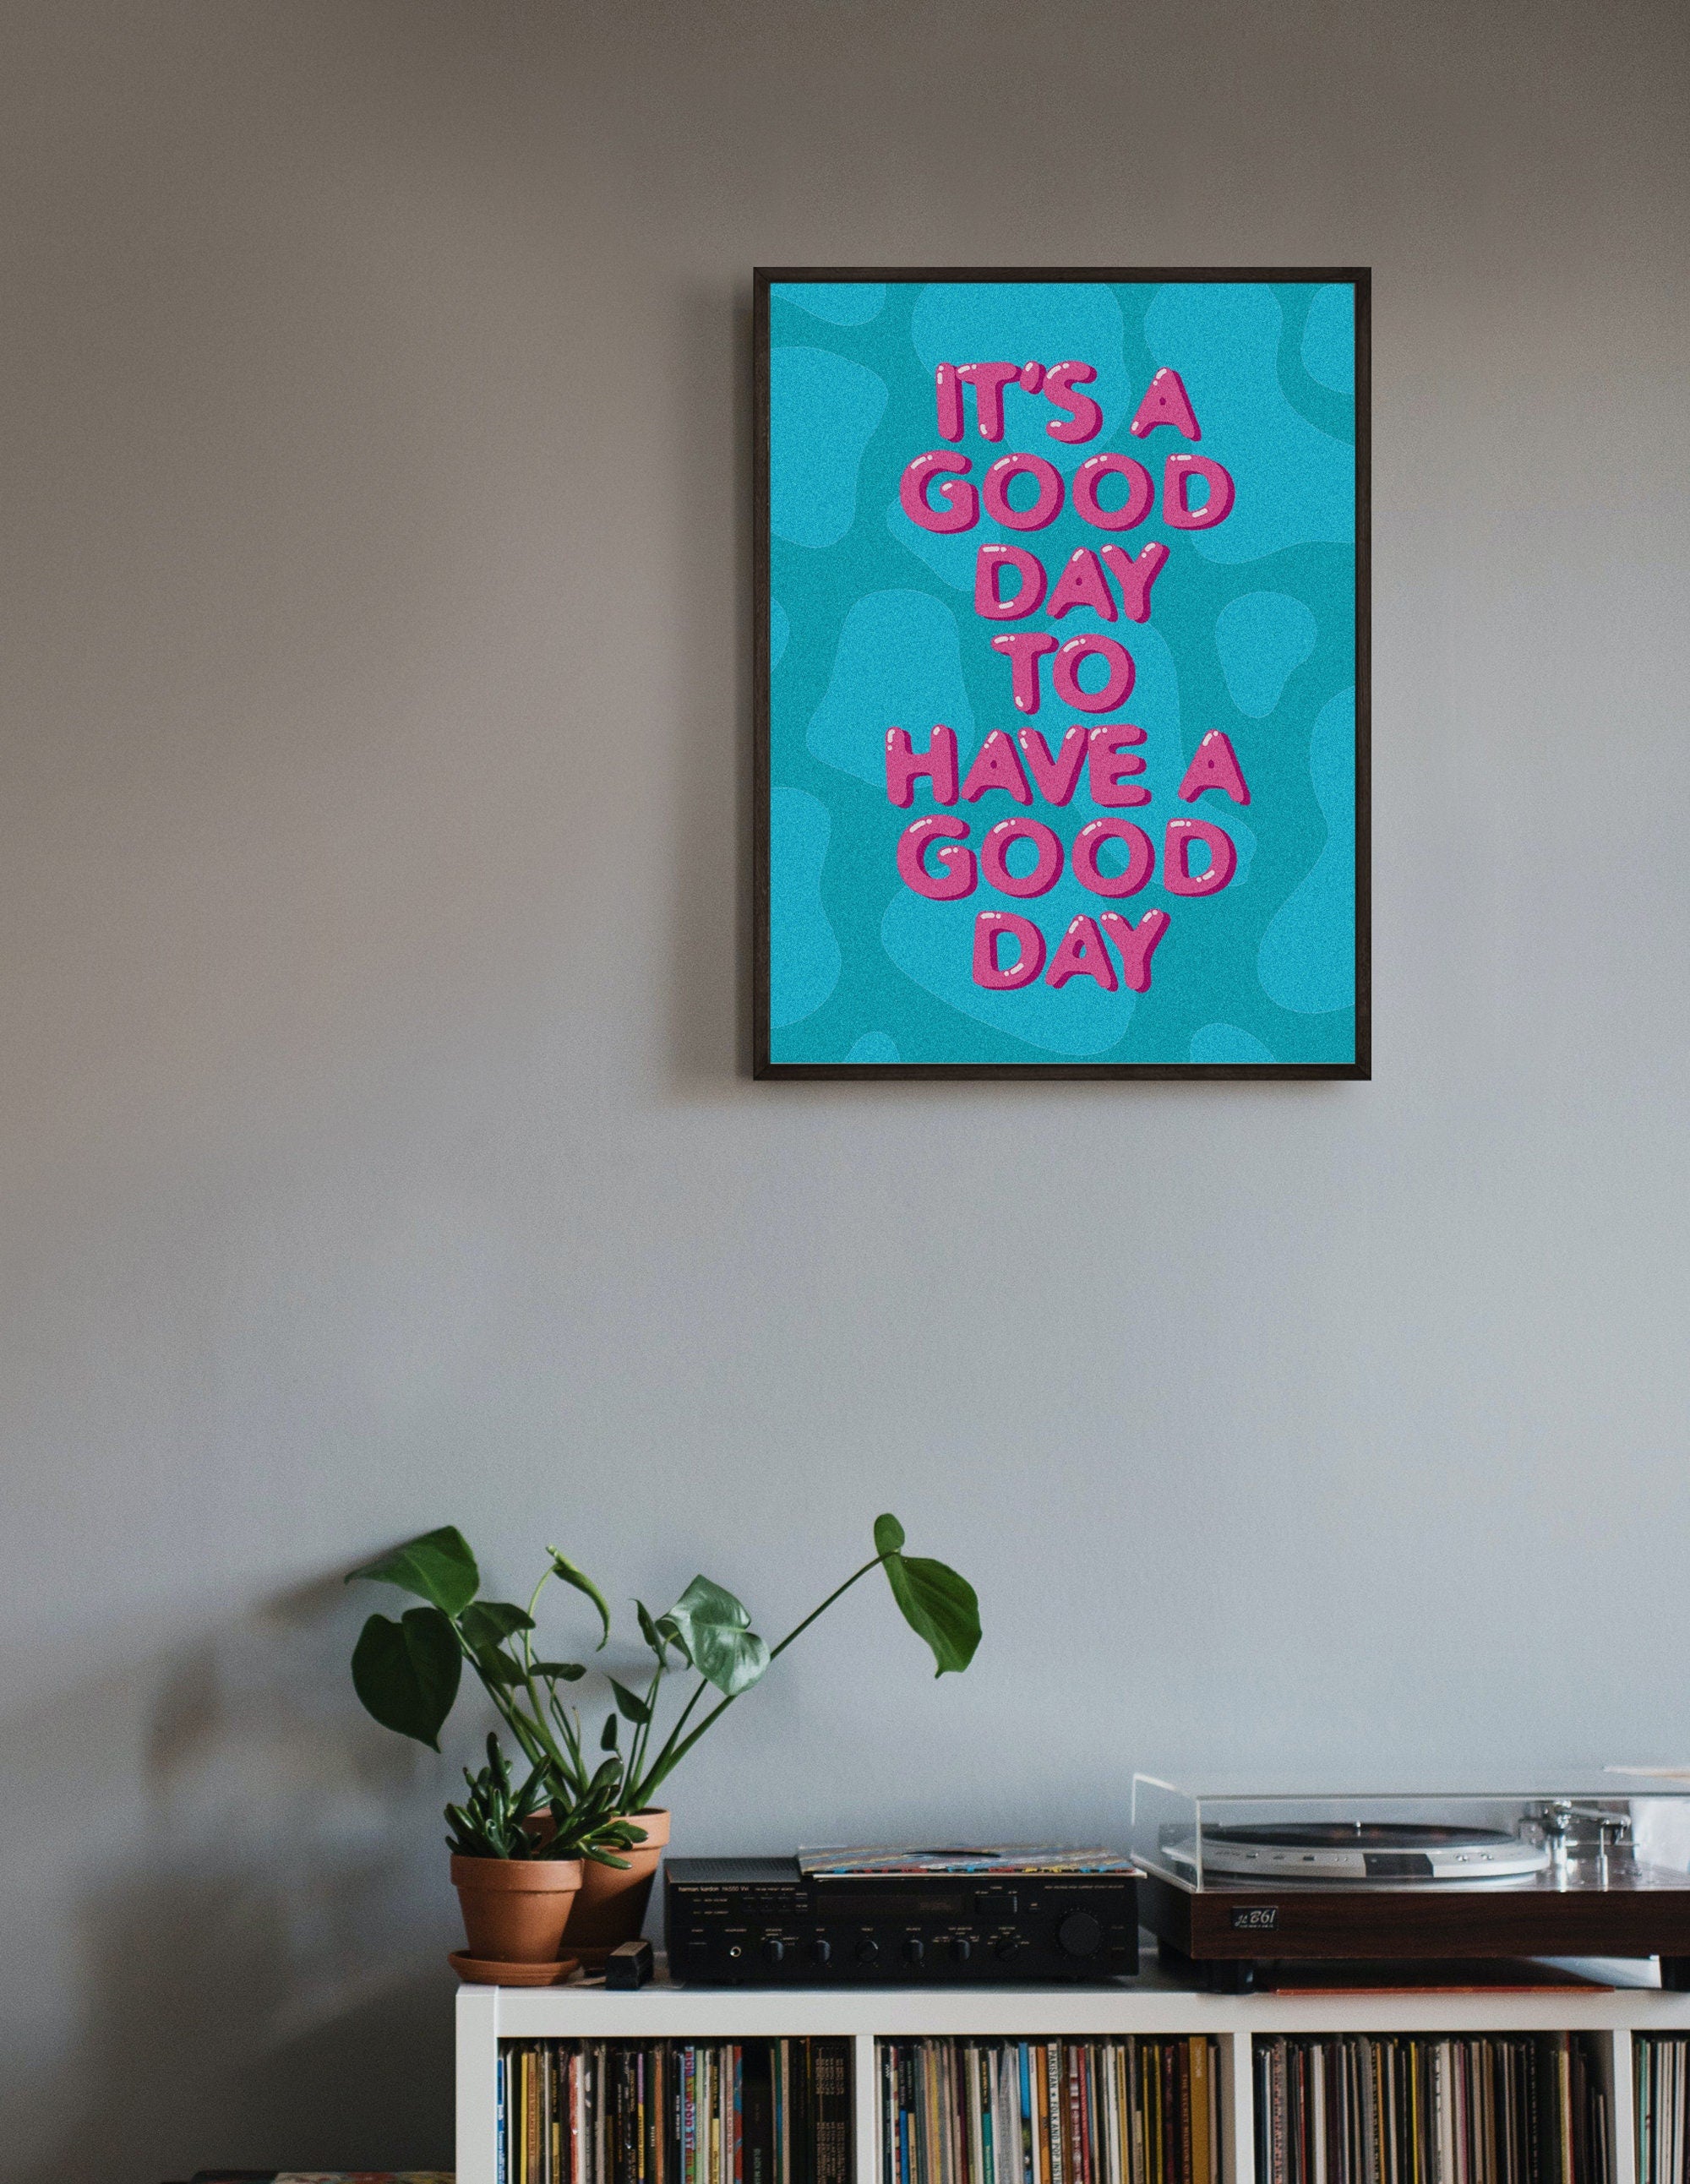 It's a Good Day Poster PRINTED 12x16 inch, Indie Aesthetic Wall Art Print, Positive Quote, Y2K Poster, Girls Room Decor, Teen Wall Decor - shopartivo